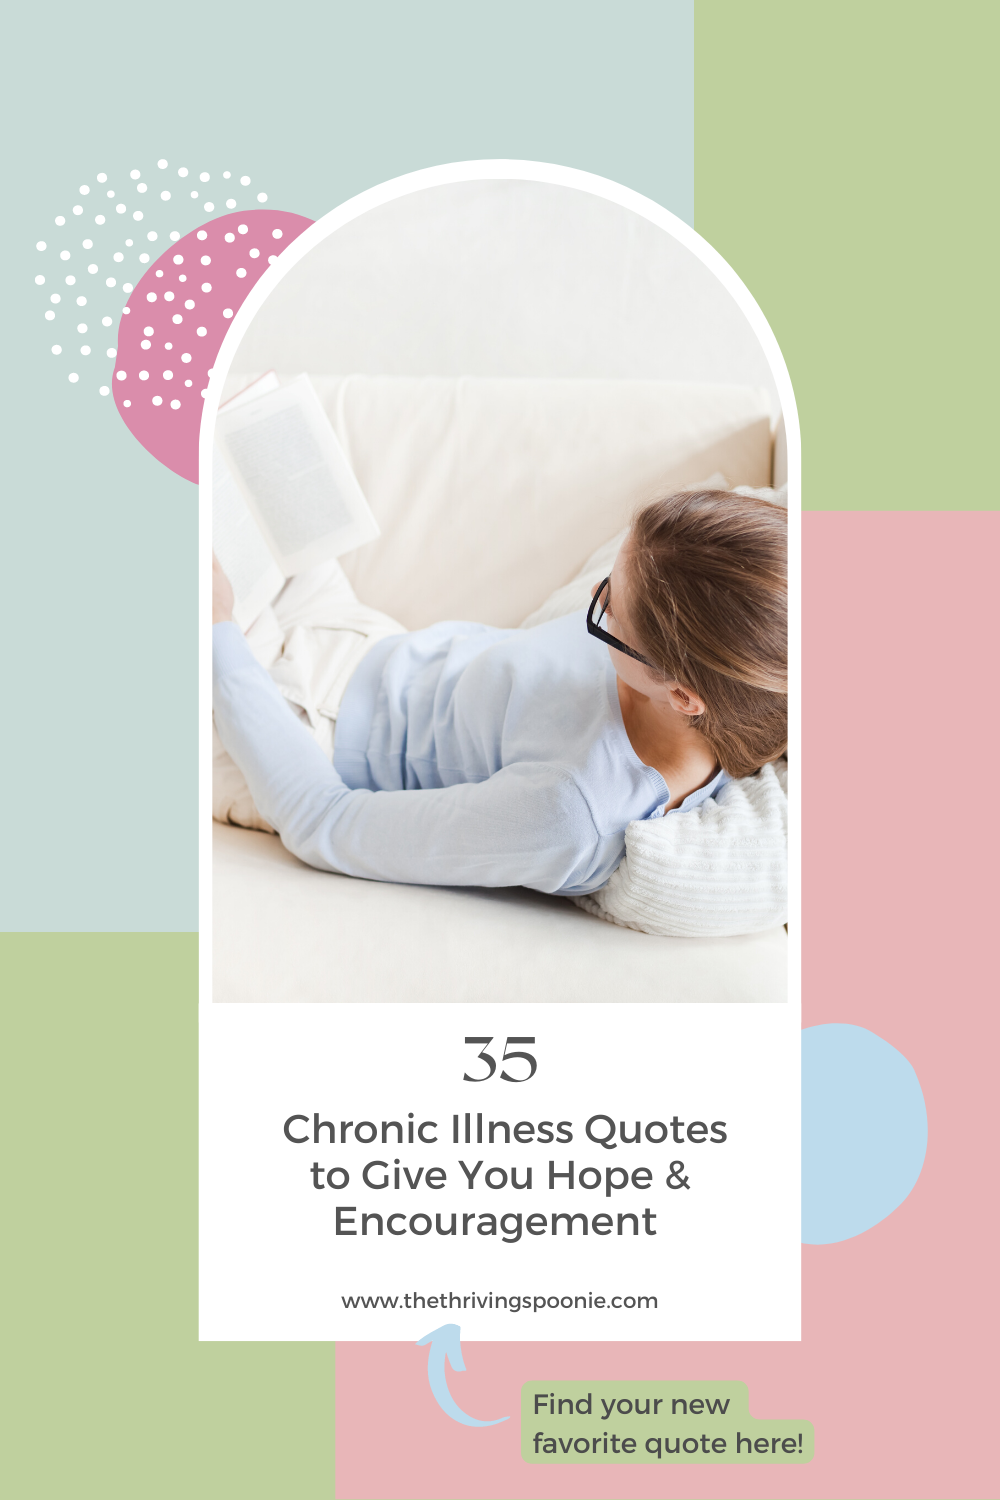 35 Chronic Illness Quotes to Give You Hope & Encouragement